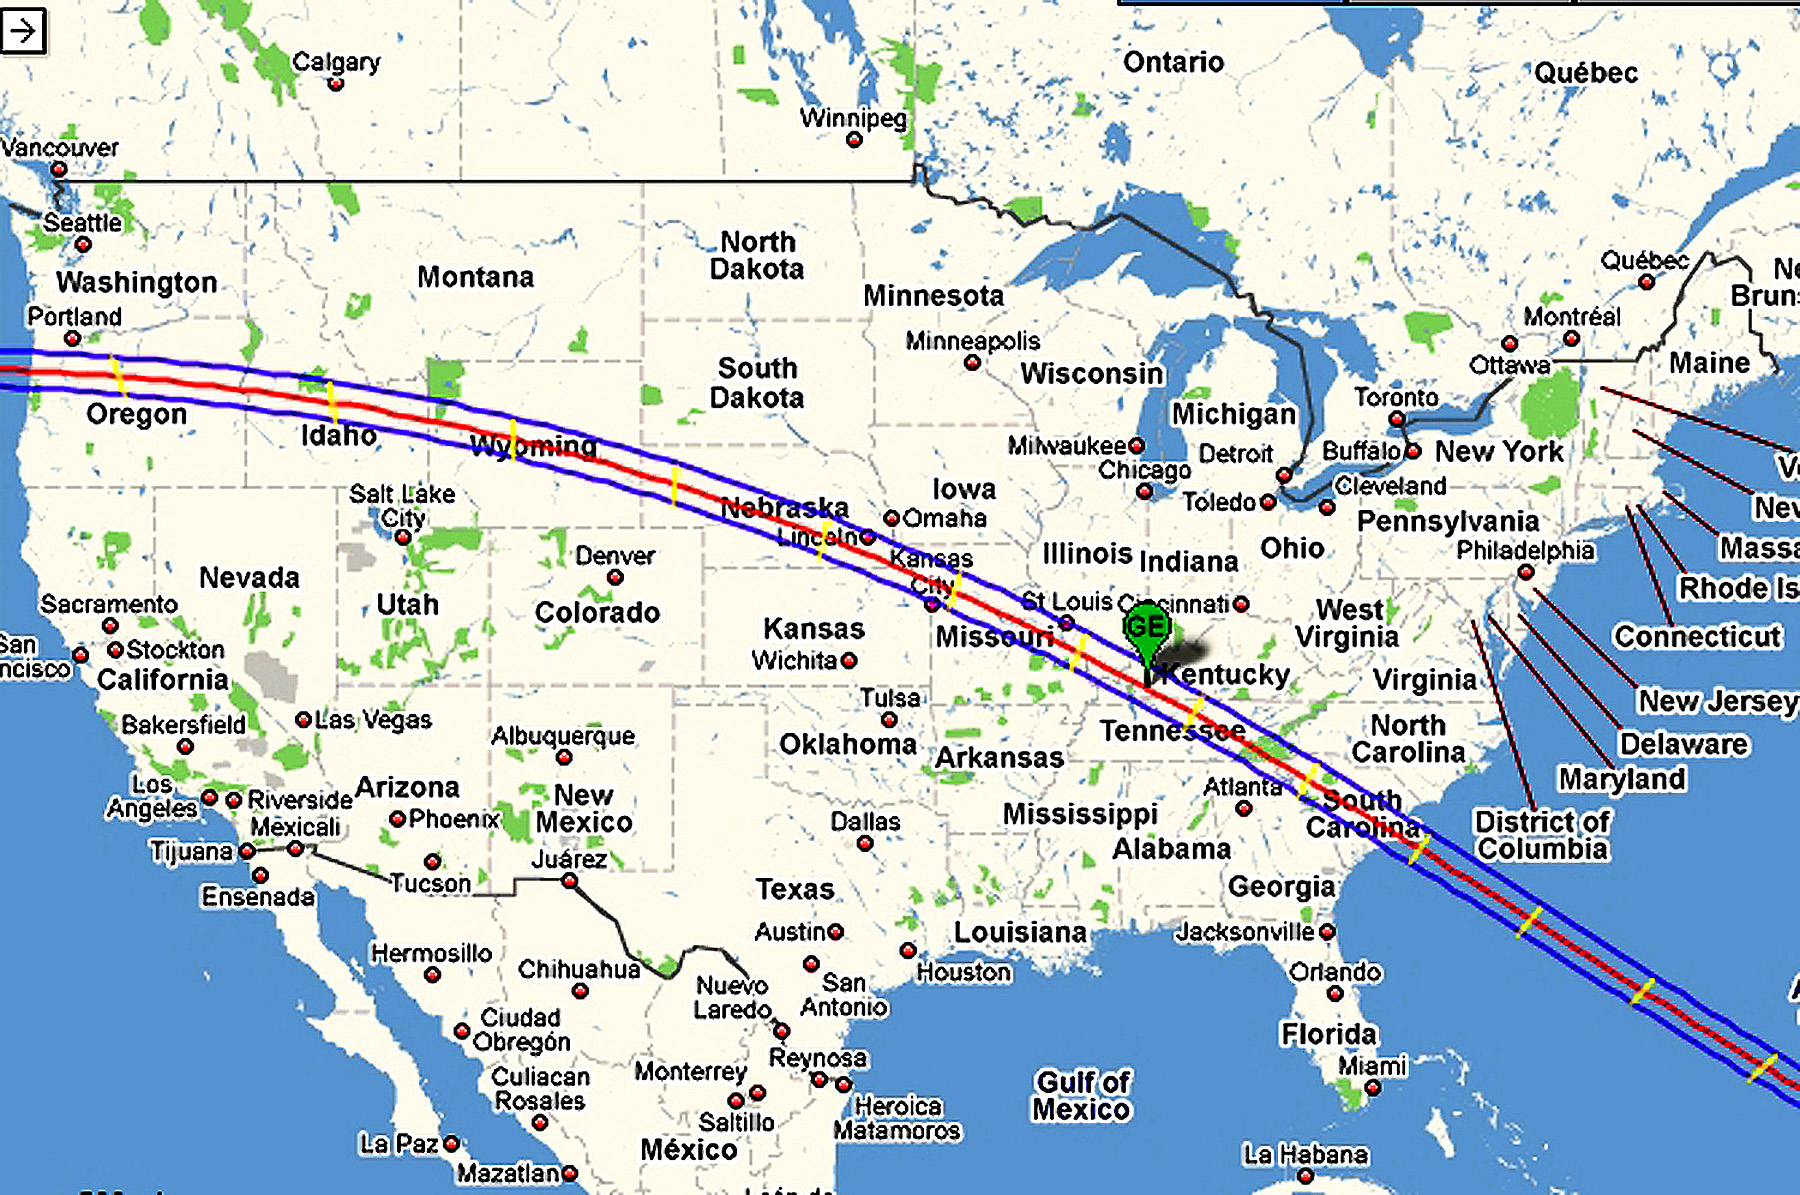 Eclipse 2017 - A04 - Path across the Continental USA